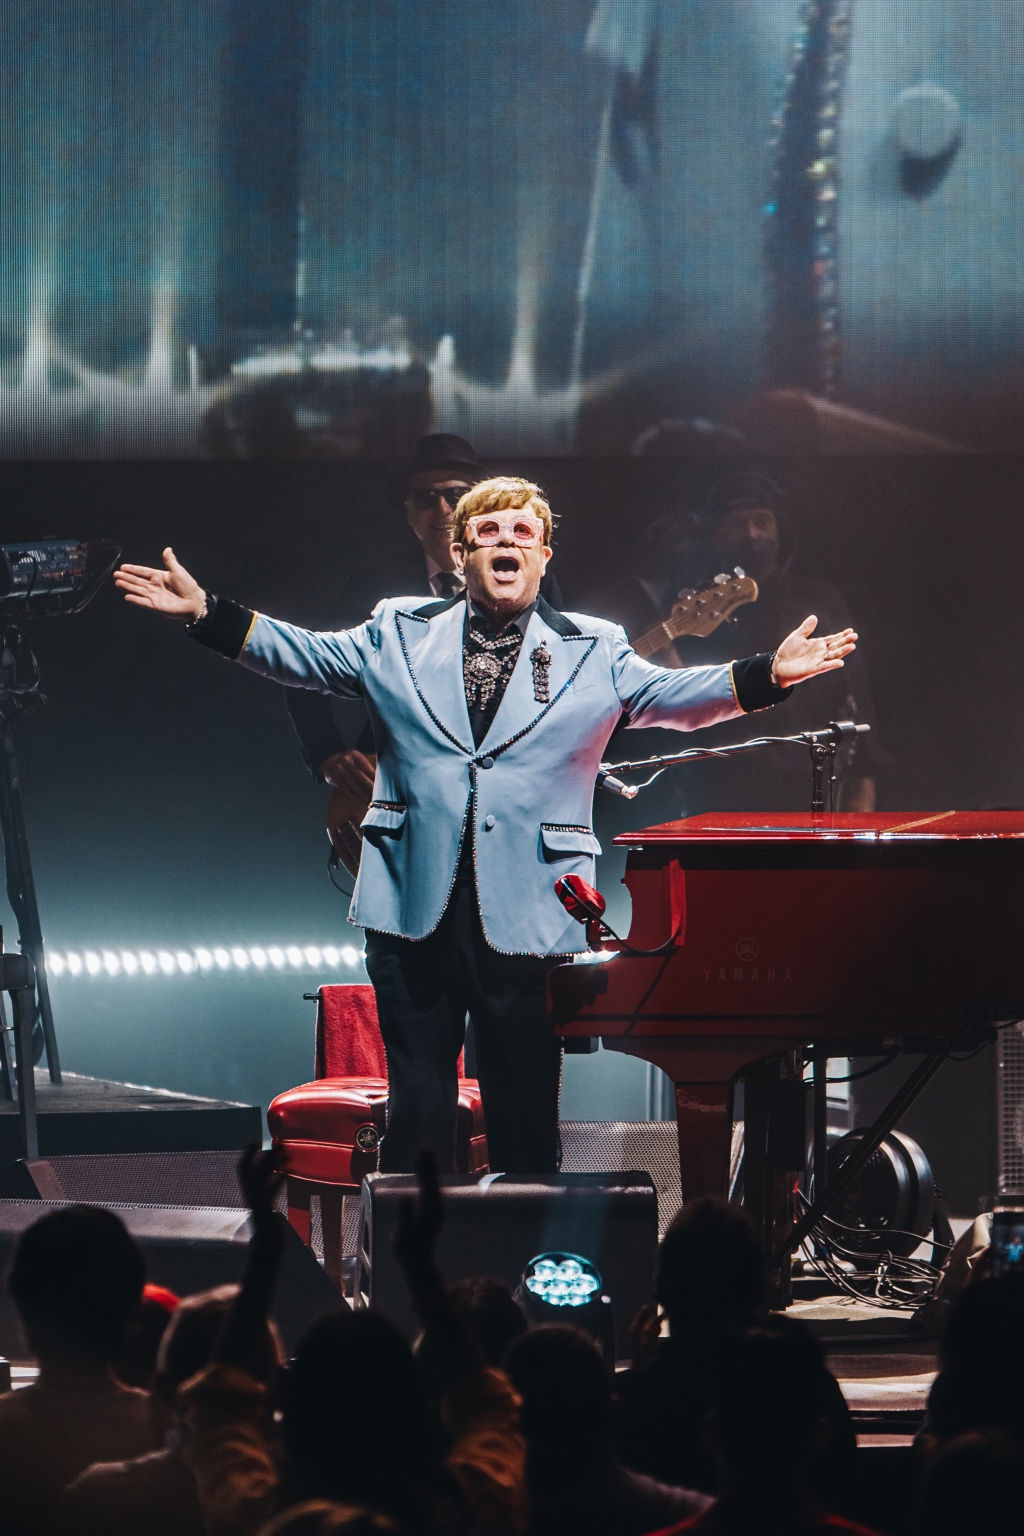 Concert Review: Elton John: wows and ows  at Hard Rock Hollywood on final tour